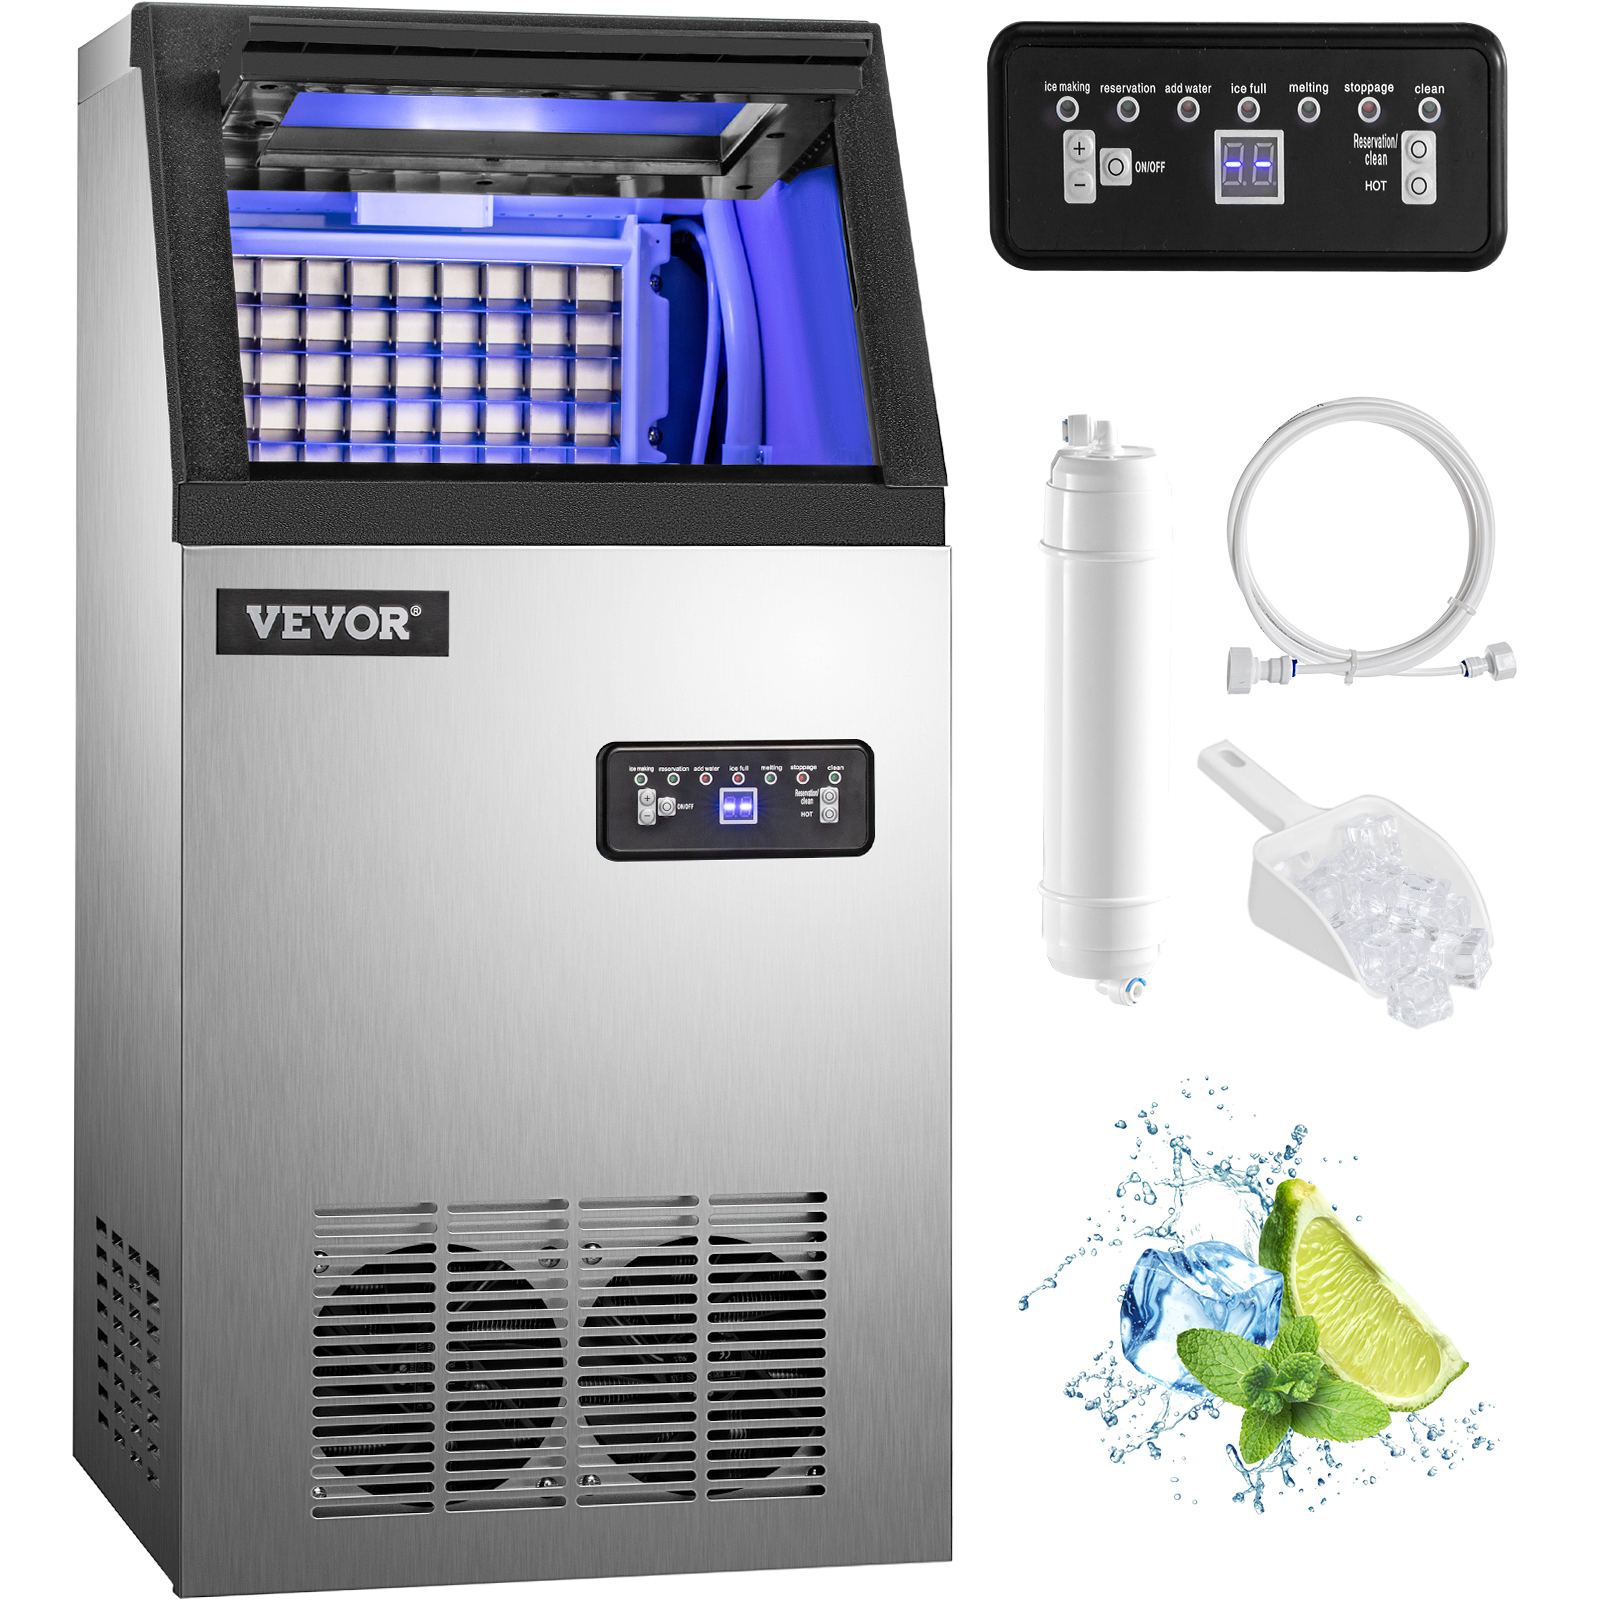 VEVOR Commercial Ice Maker, 100 lbs/24h, Stainless Steel Under Counter Ice Machine with 29 lbs Storage Bin, 4x8 Cubes Ready in 15 Mins, Water Filte от Vevor Many GEOs